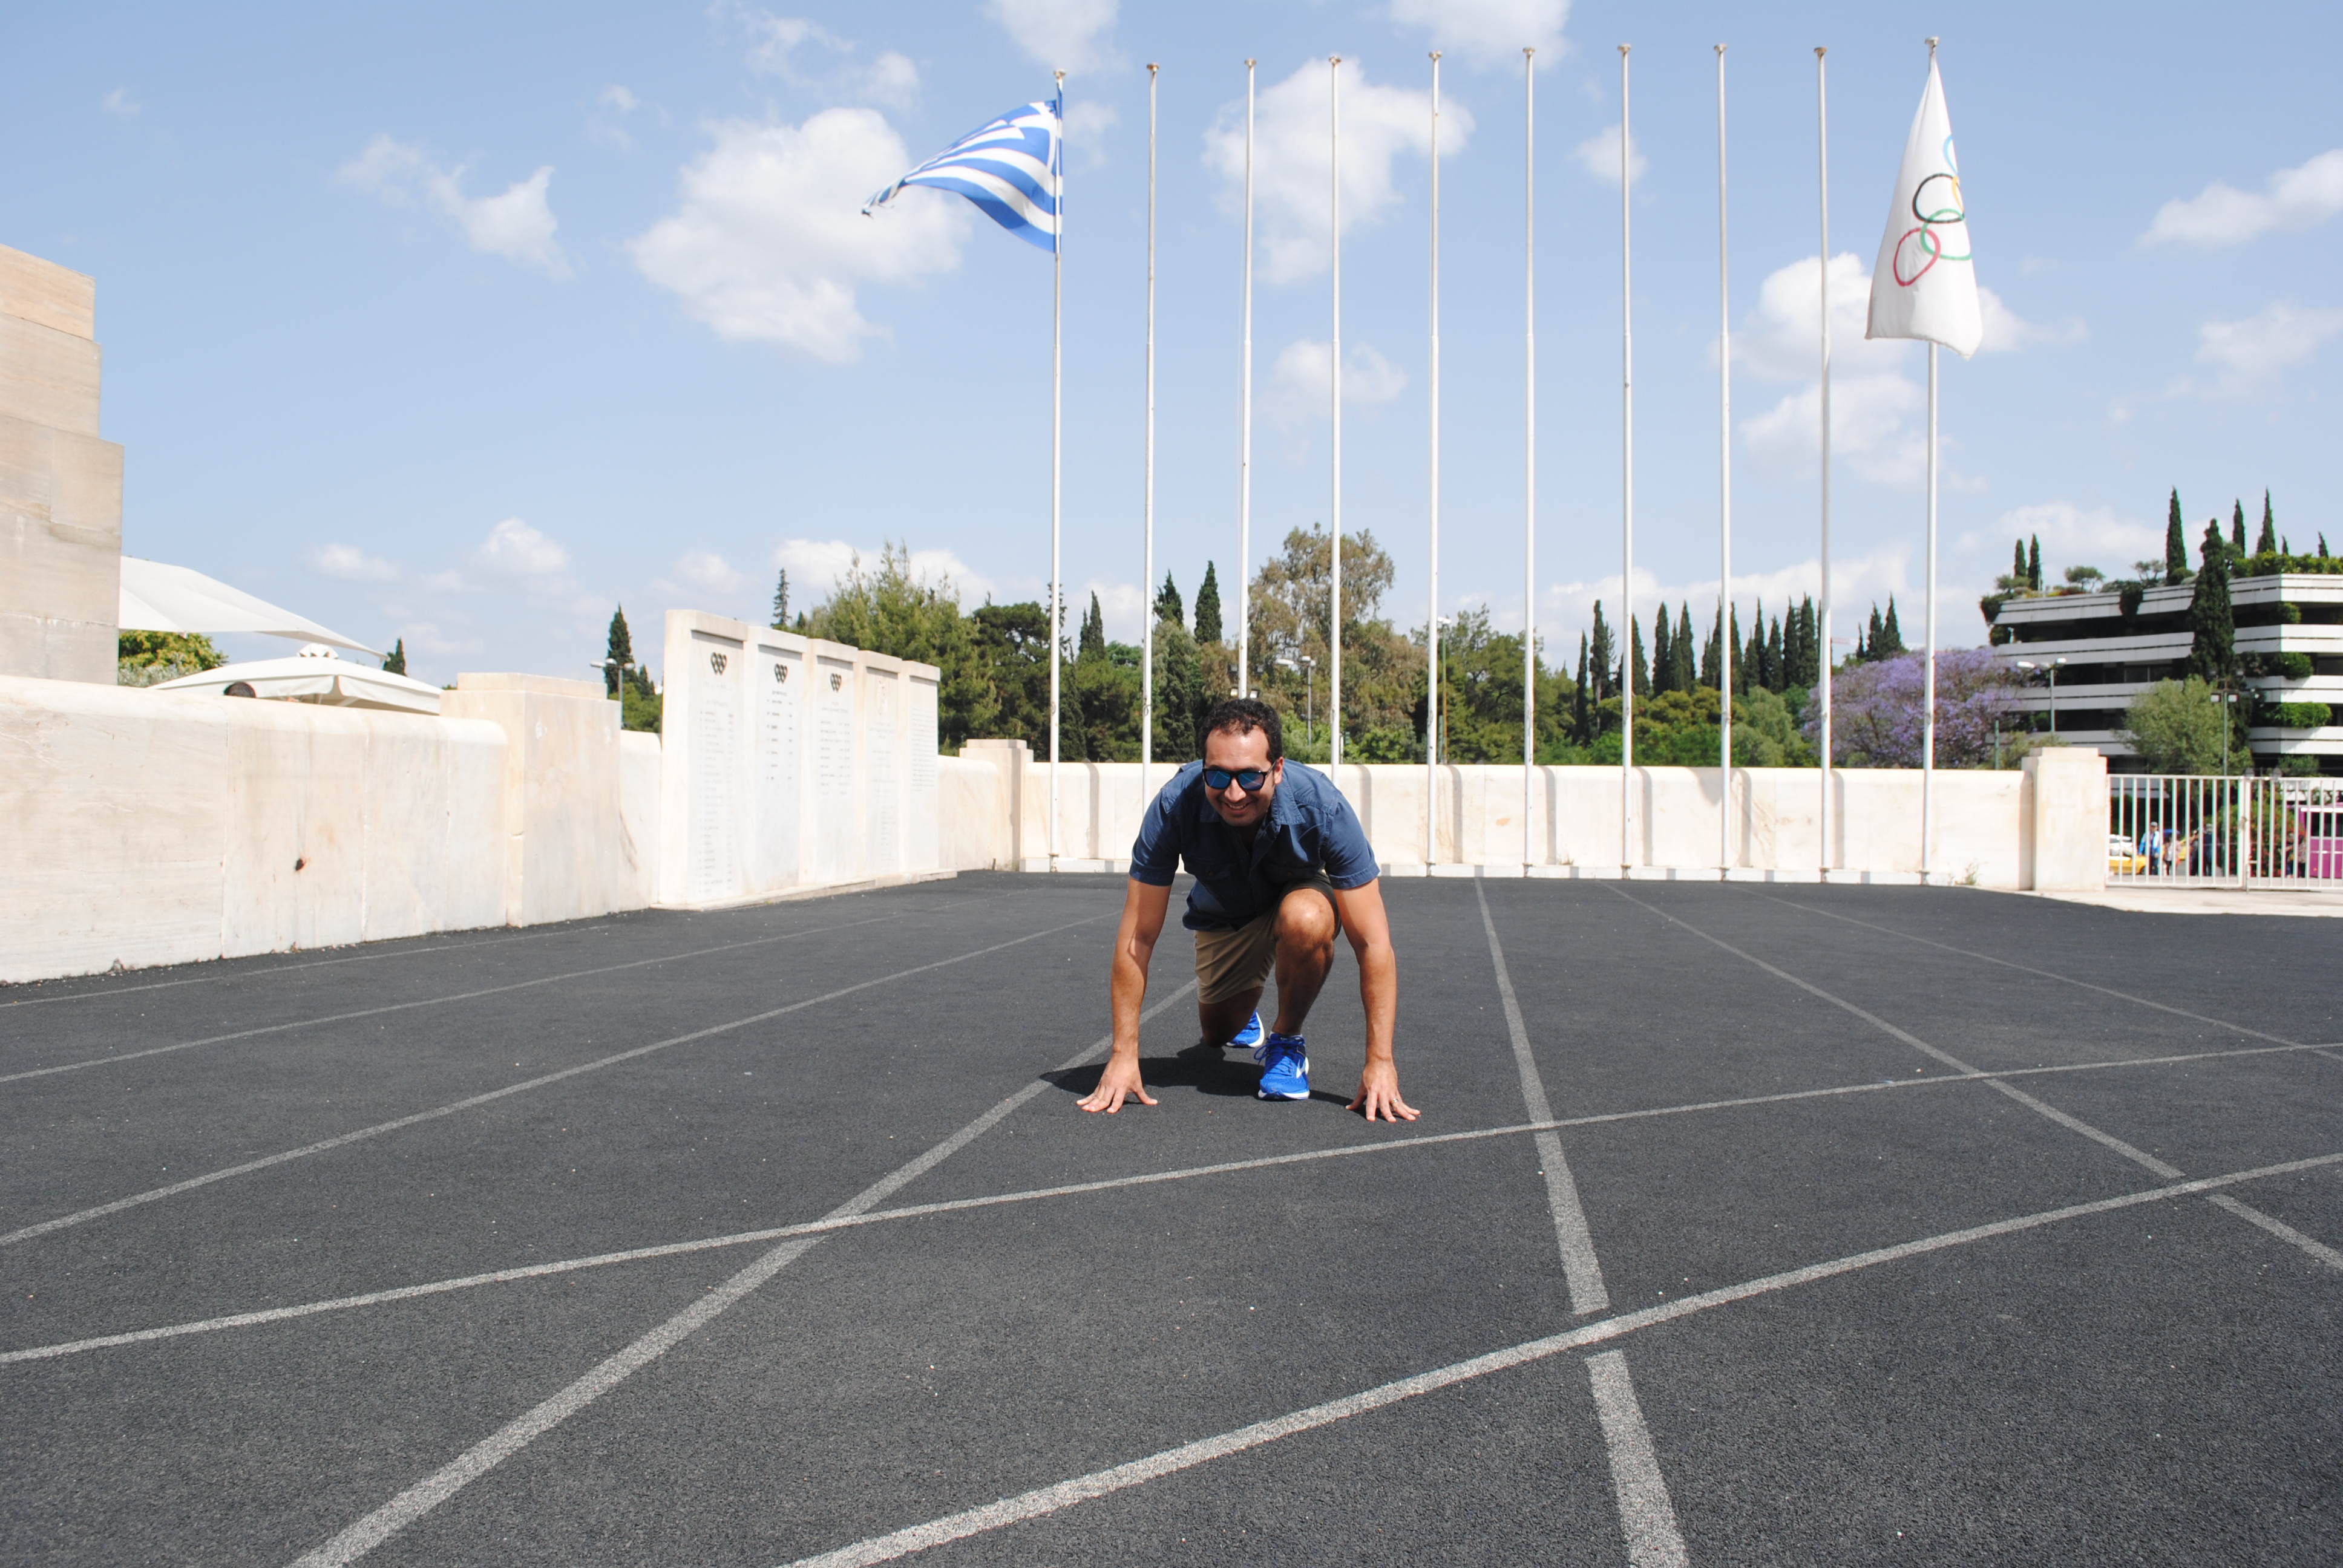 Must Do in Greece: Visit the Olympic Stadium